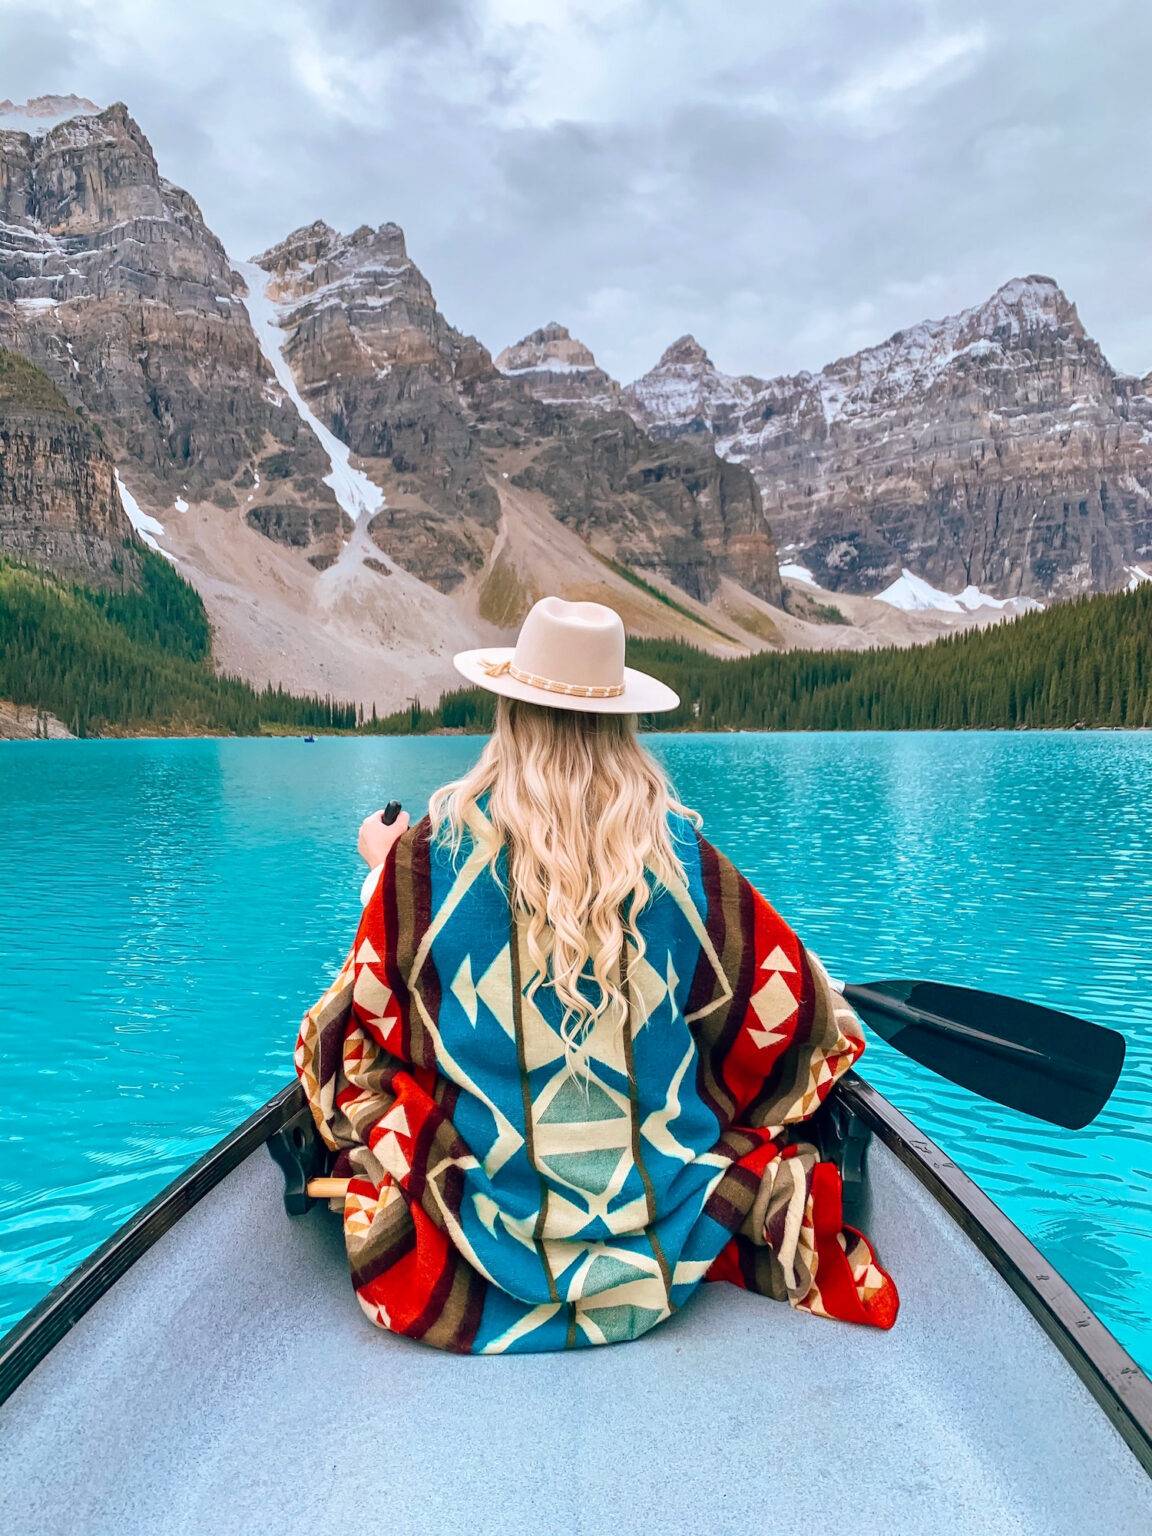 50 Best Things to do in Banff National Park - Ultimate Banff Travel Guide